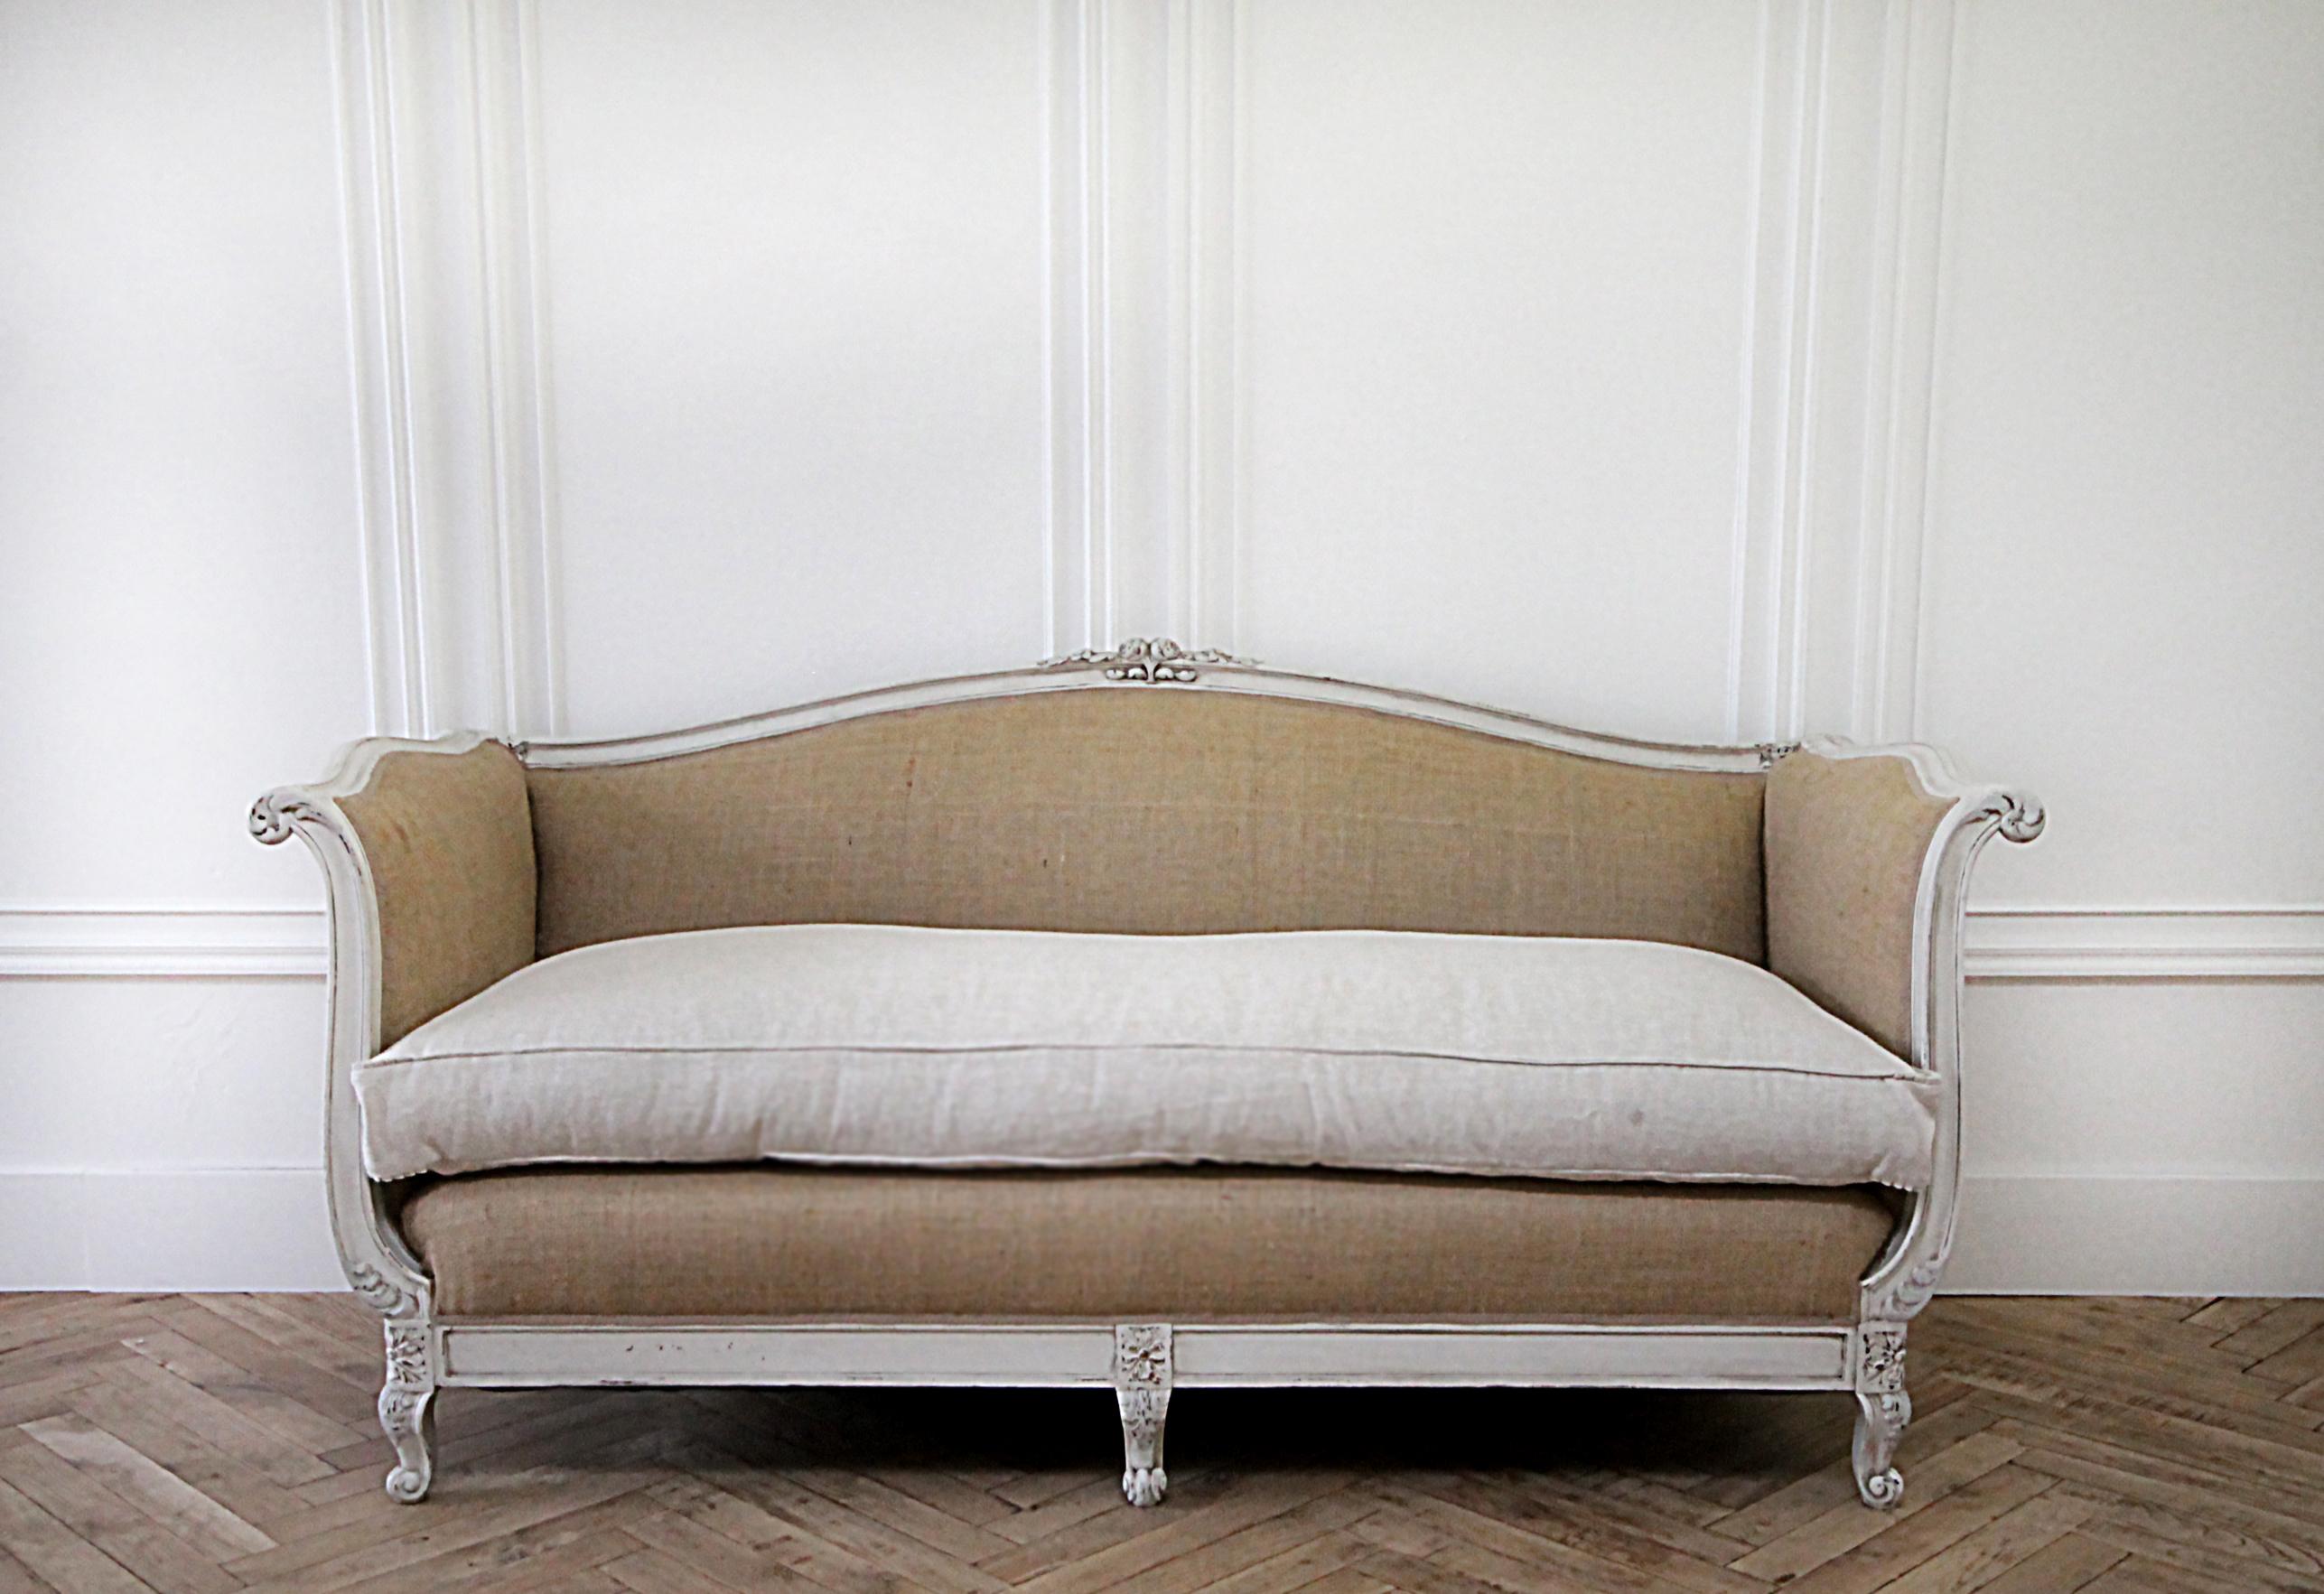 20th century French Louis XV Style linen upholstered sofa
A beautiful French style sofa upholstered in a burlap and 100% linen. The cushion is a thick nubby textured natural colored linen, finished with a flange and pleated ruffle corners. A plush